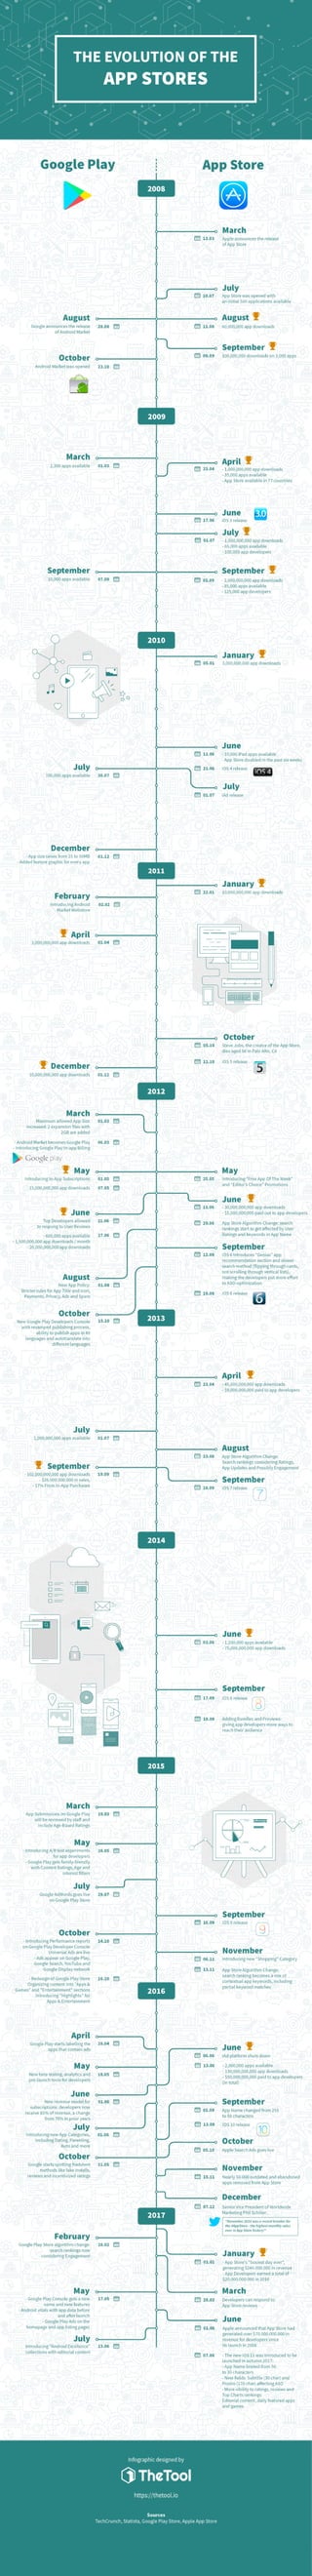 Infographic: The Evolution of The App Stores